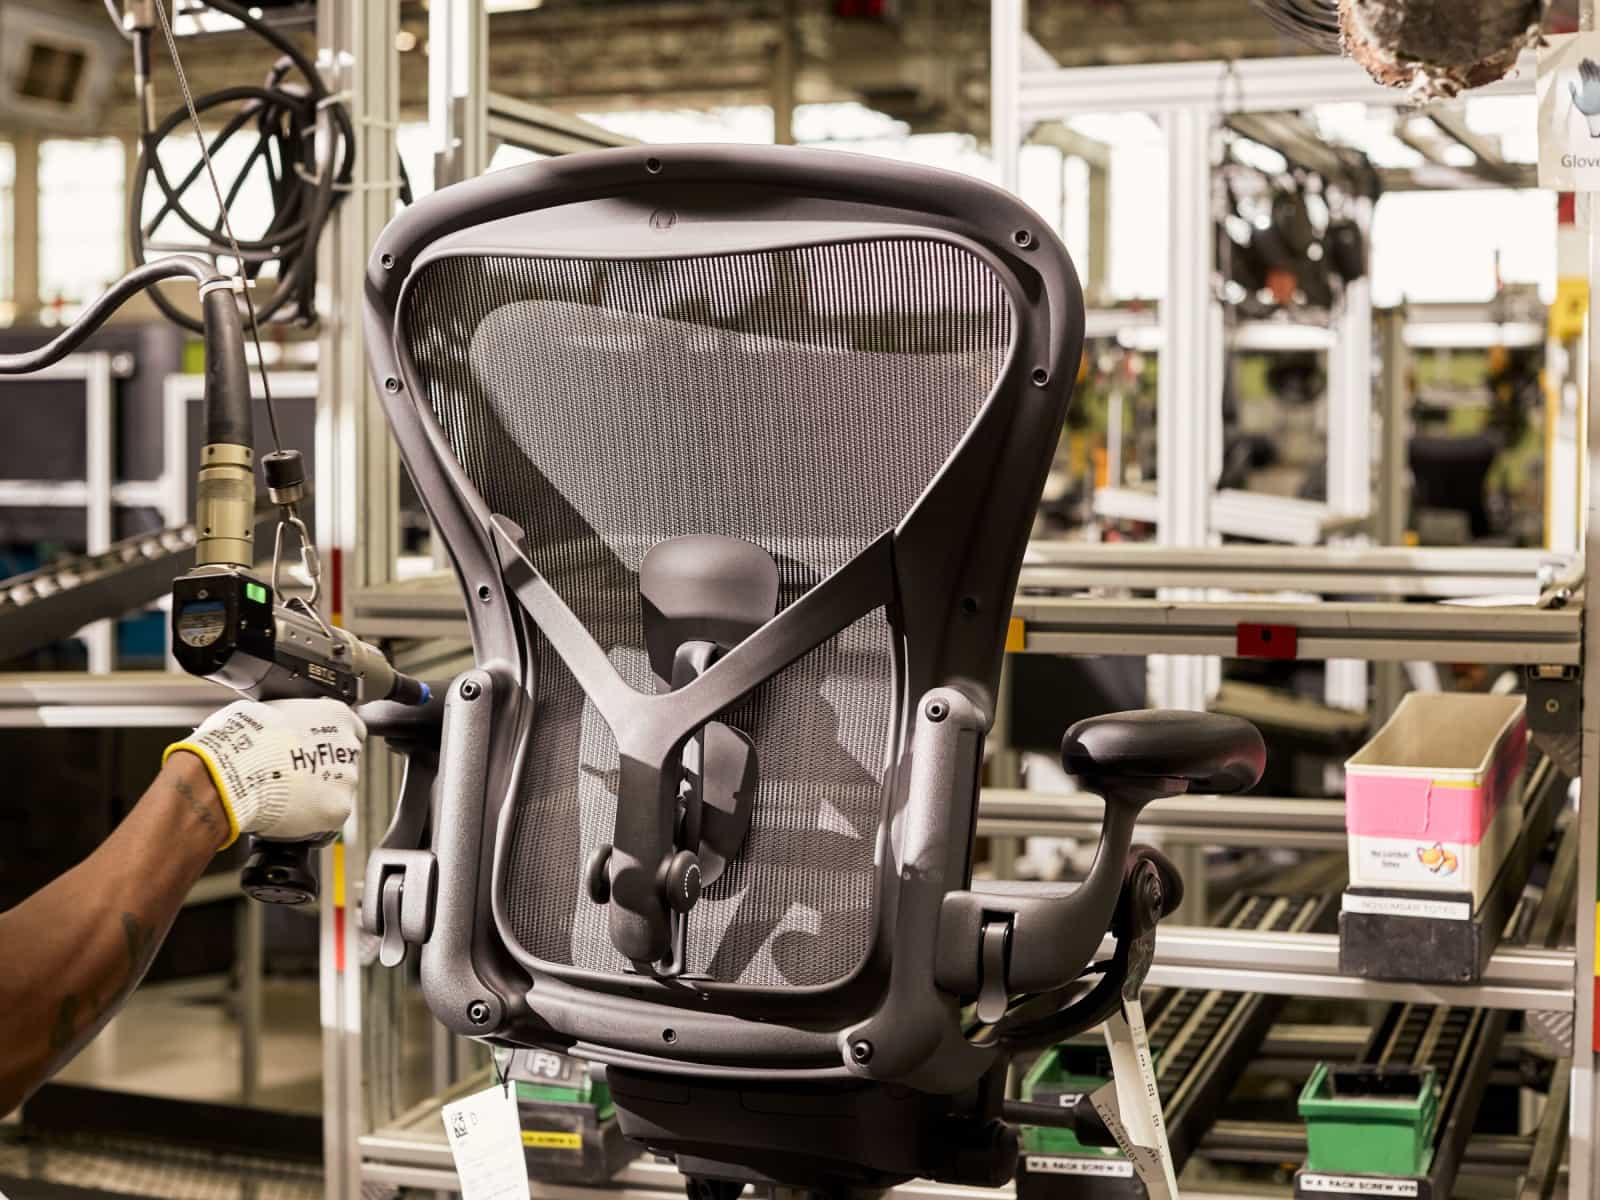 A back view of the Aeron Chair in its final stages of production on the assembly line.